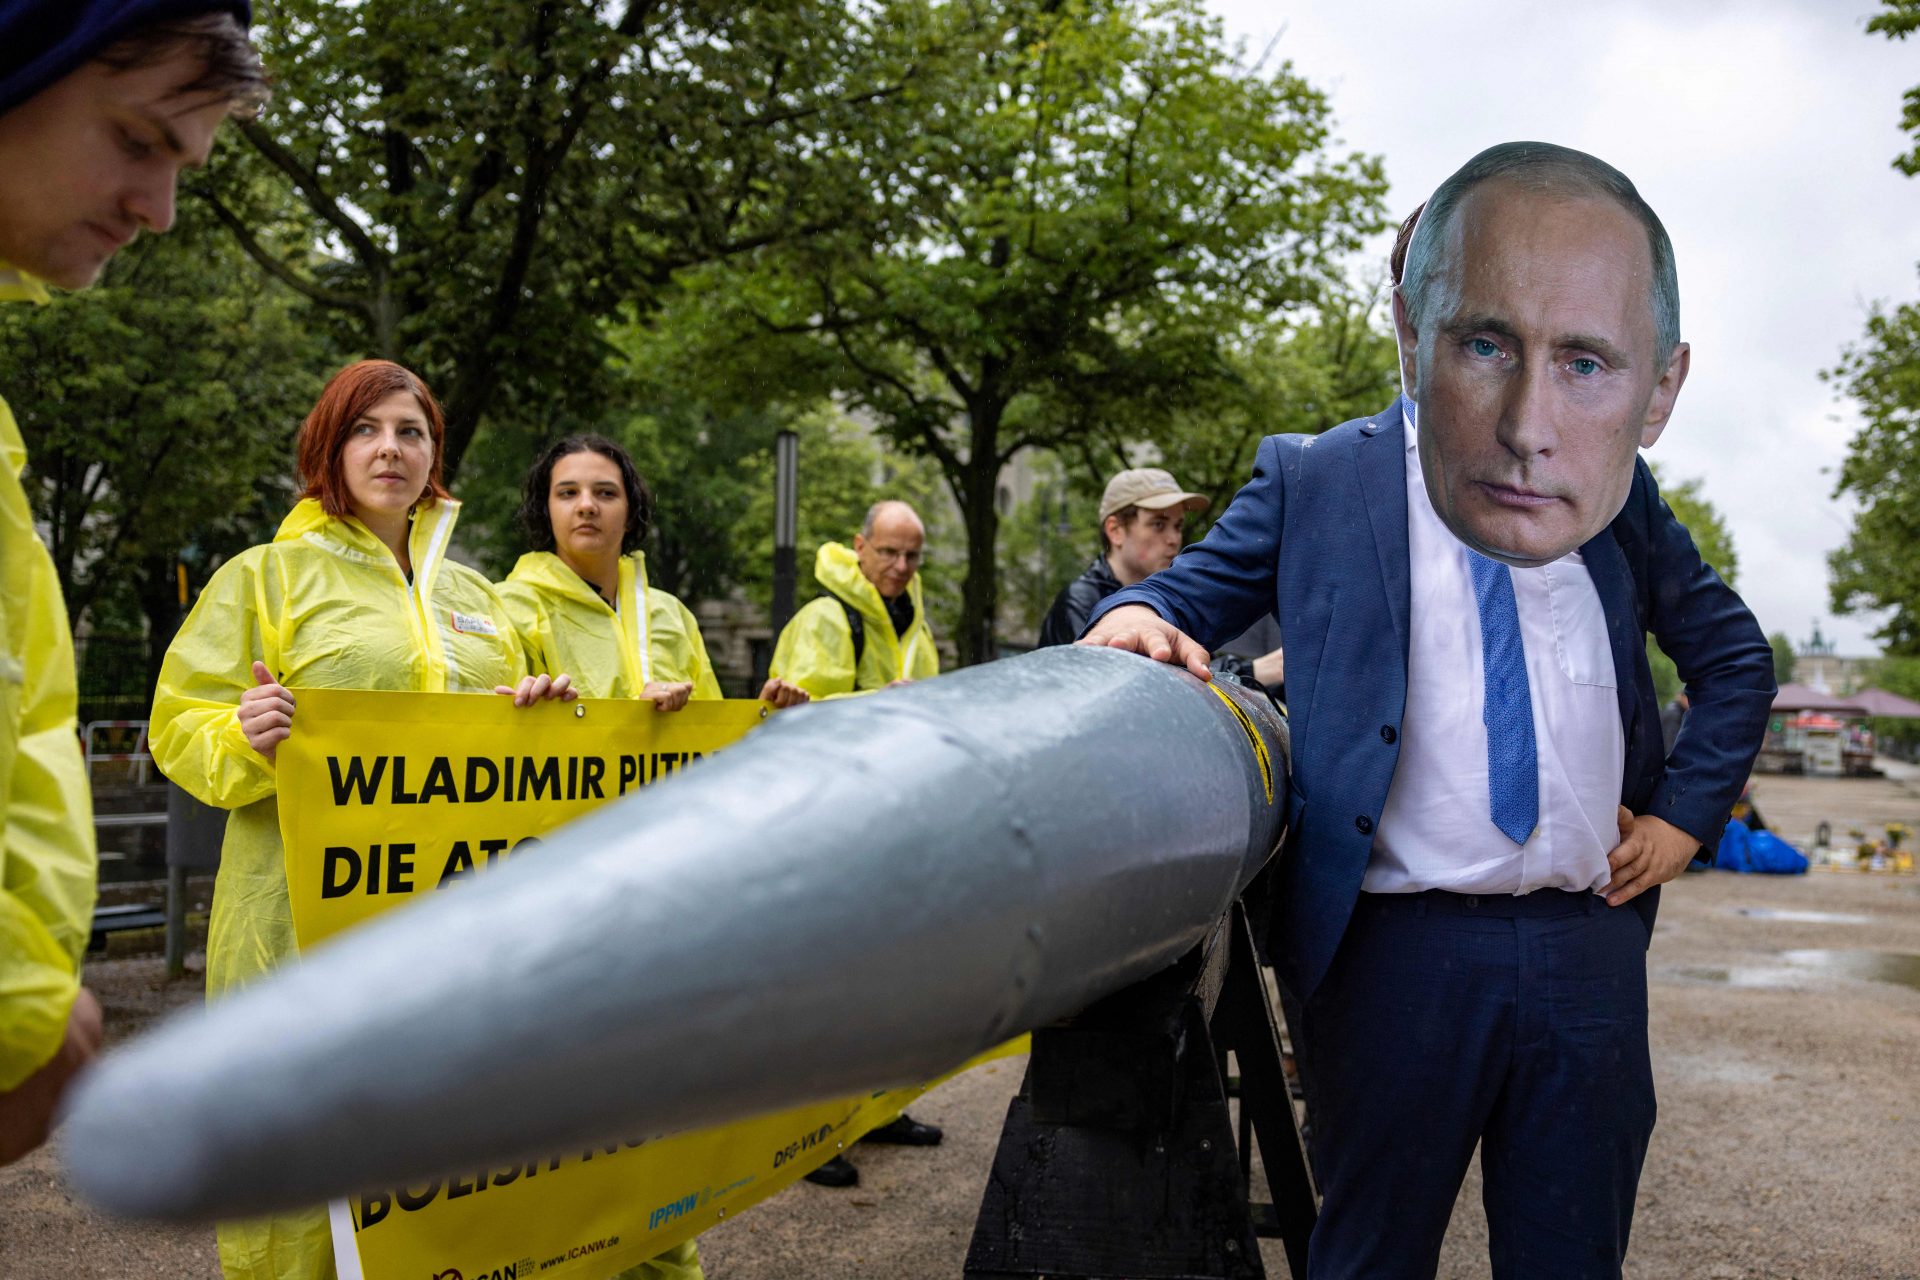 Putin probably won't ever use nukes in Ukraine -here's why